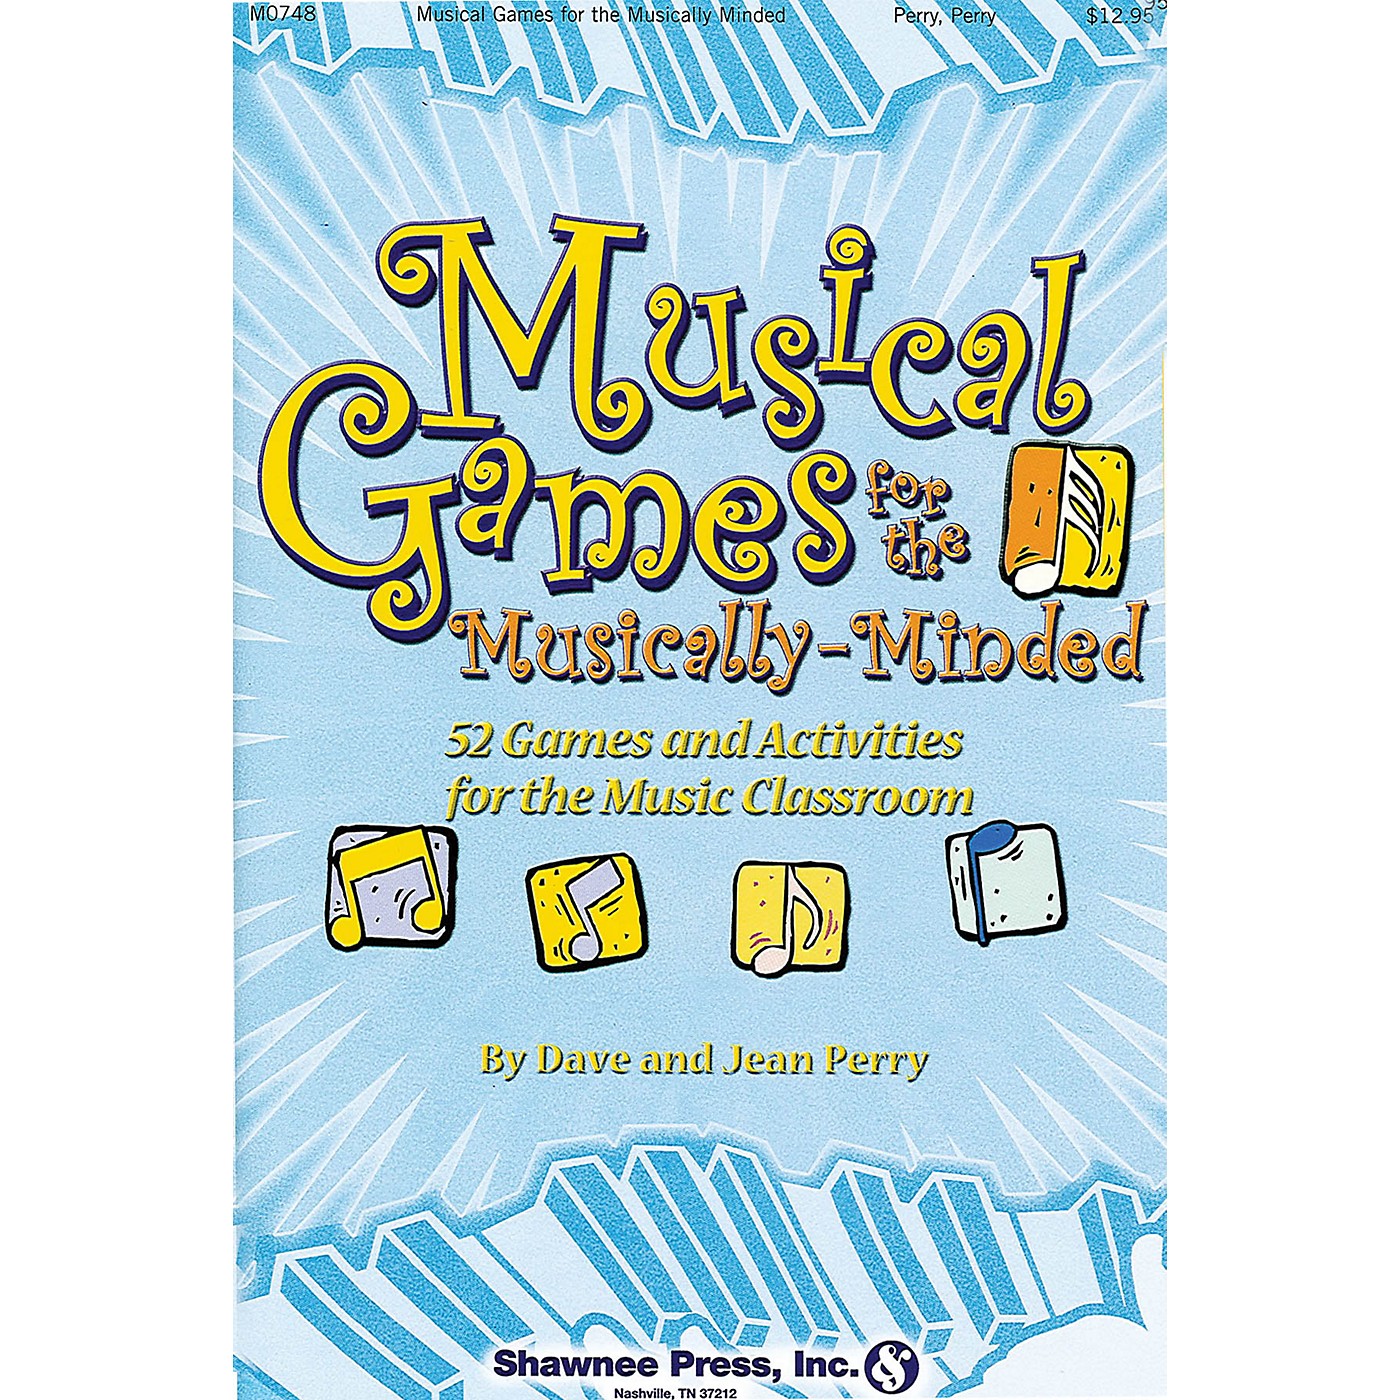 Shawnee Press Musical Games for the Musically-Minded music activities & puzzles thumbnail